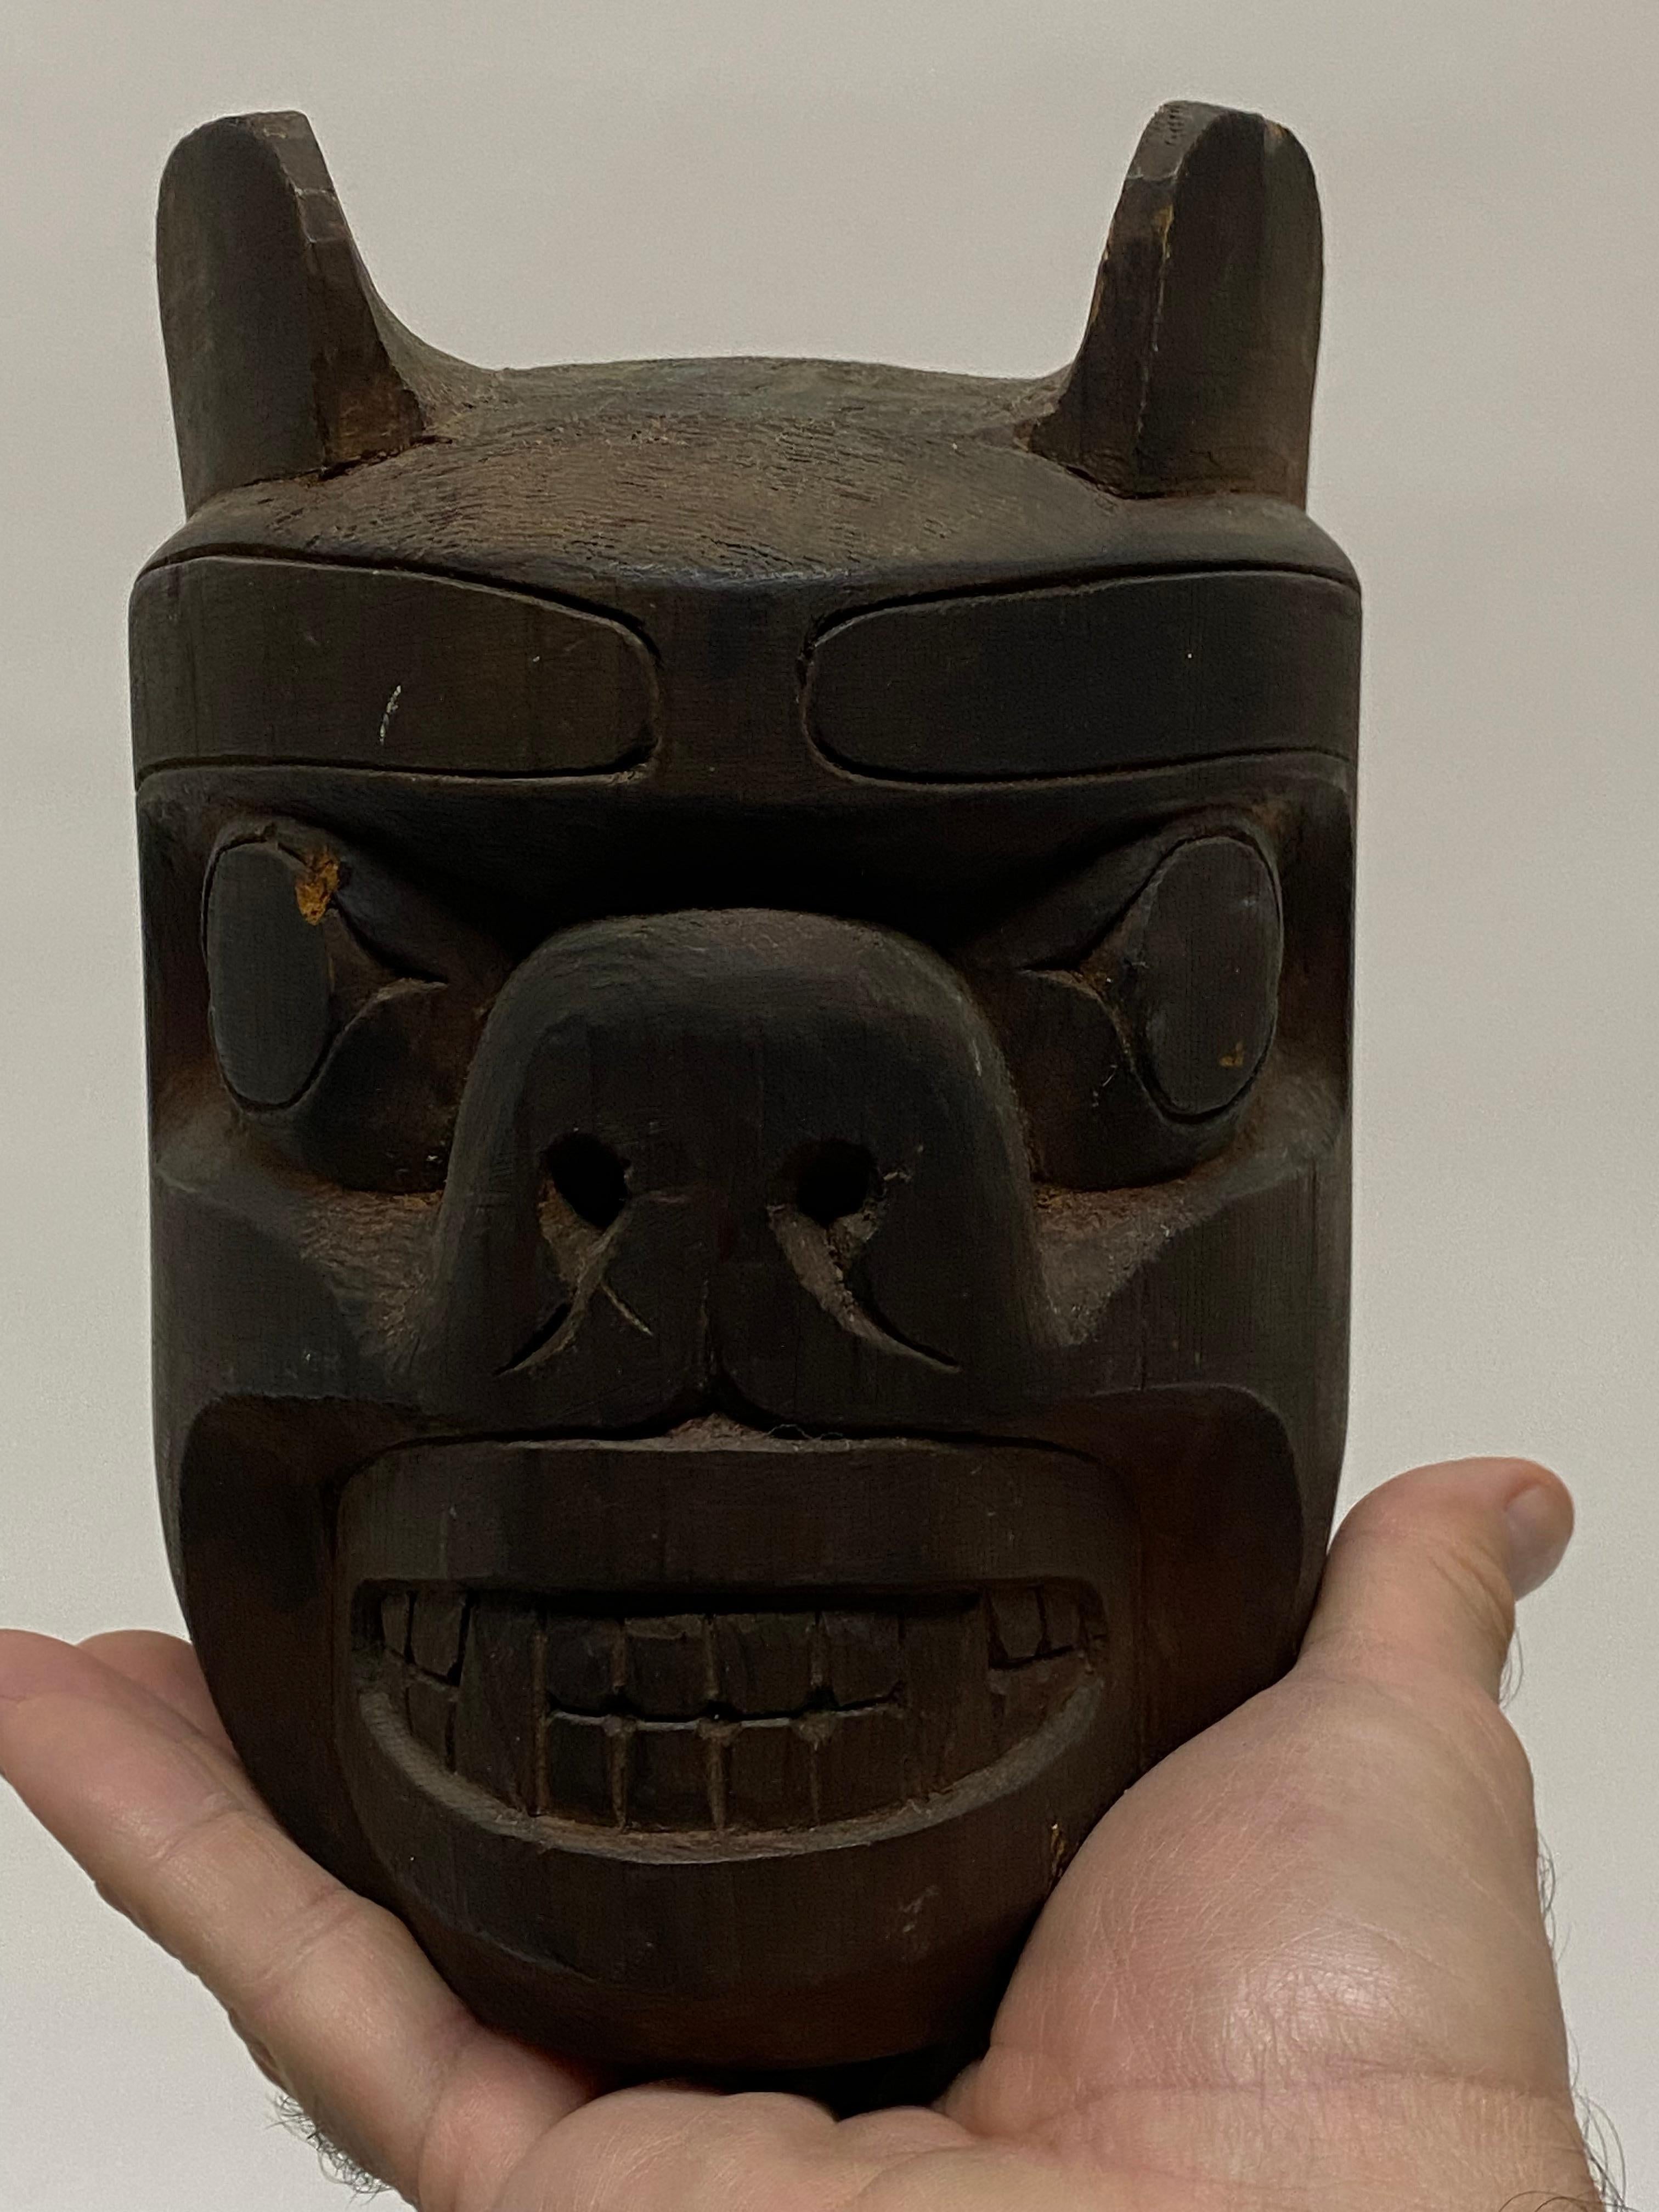 Authentic First Nations wood carved mask by master carver, Henry Hunt (1923-1985). This hand carved gem depicts a Canadian Grizzly Bear. Pencil signed in cursive on the reverse, Henry Hunt. Carved out of Pacific Northwest pine. Hunt had a rich